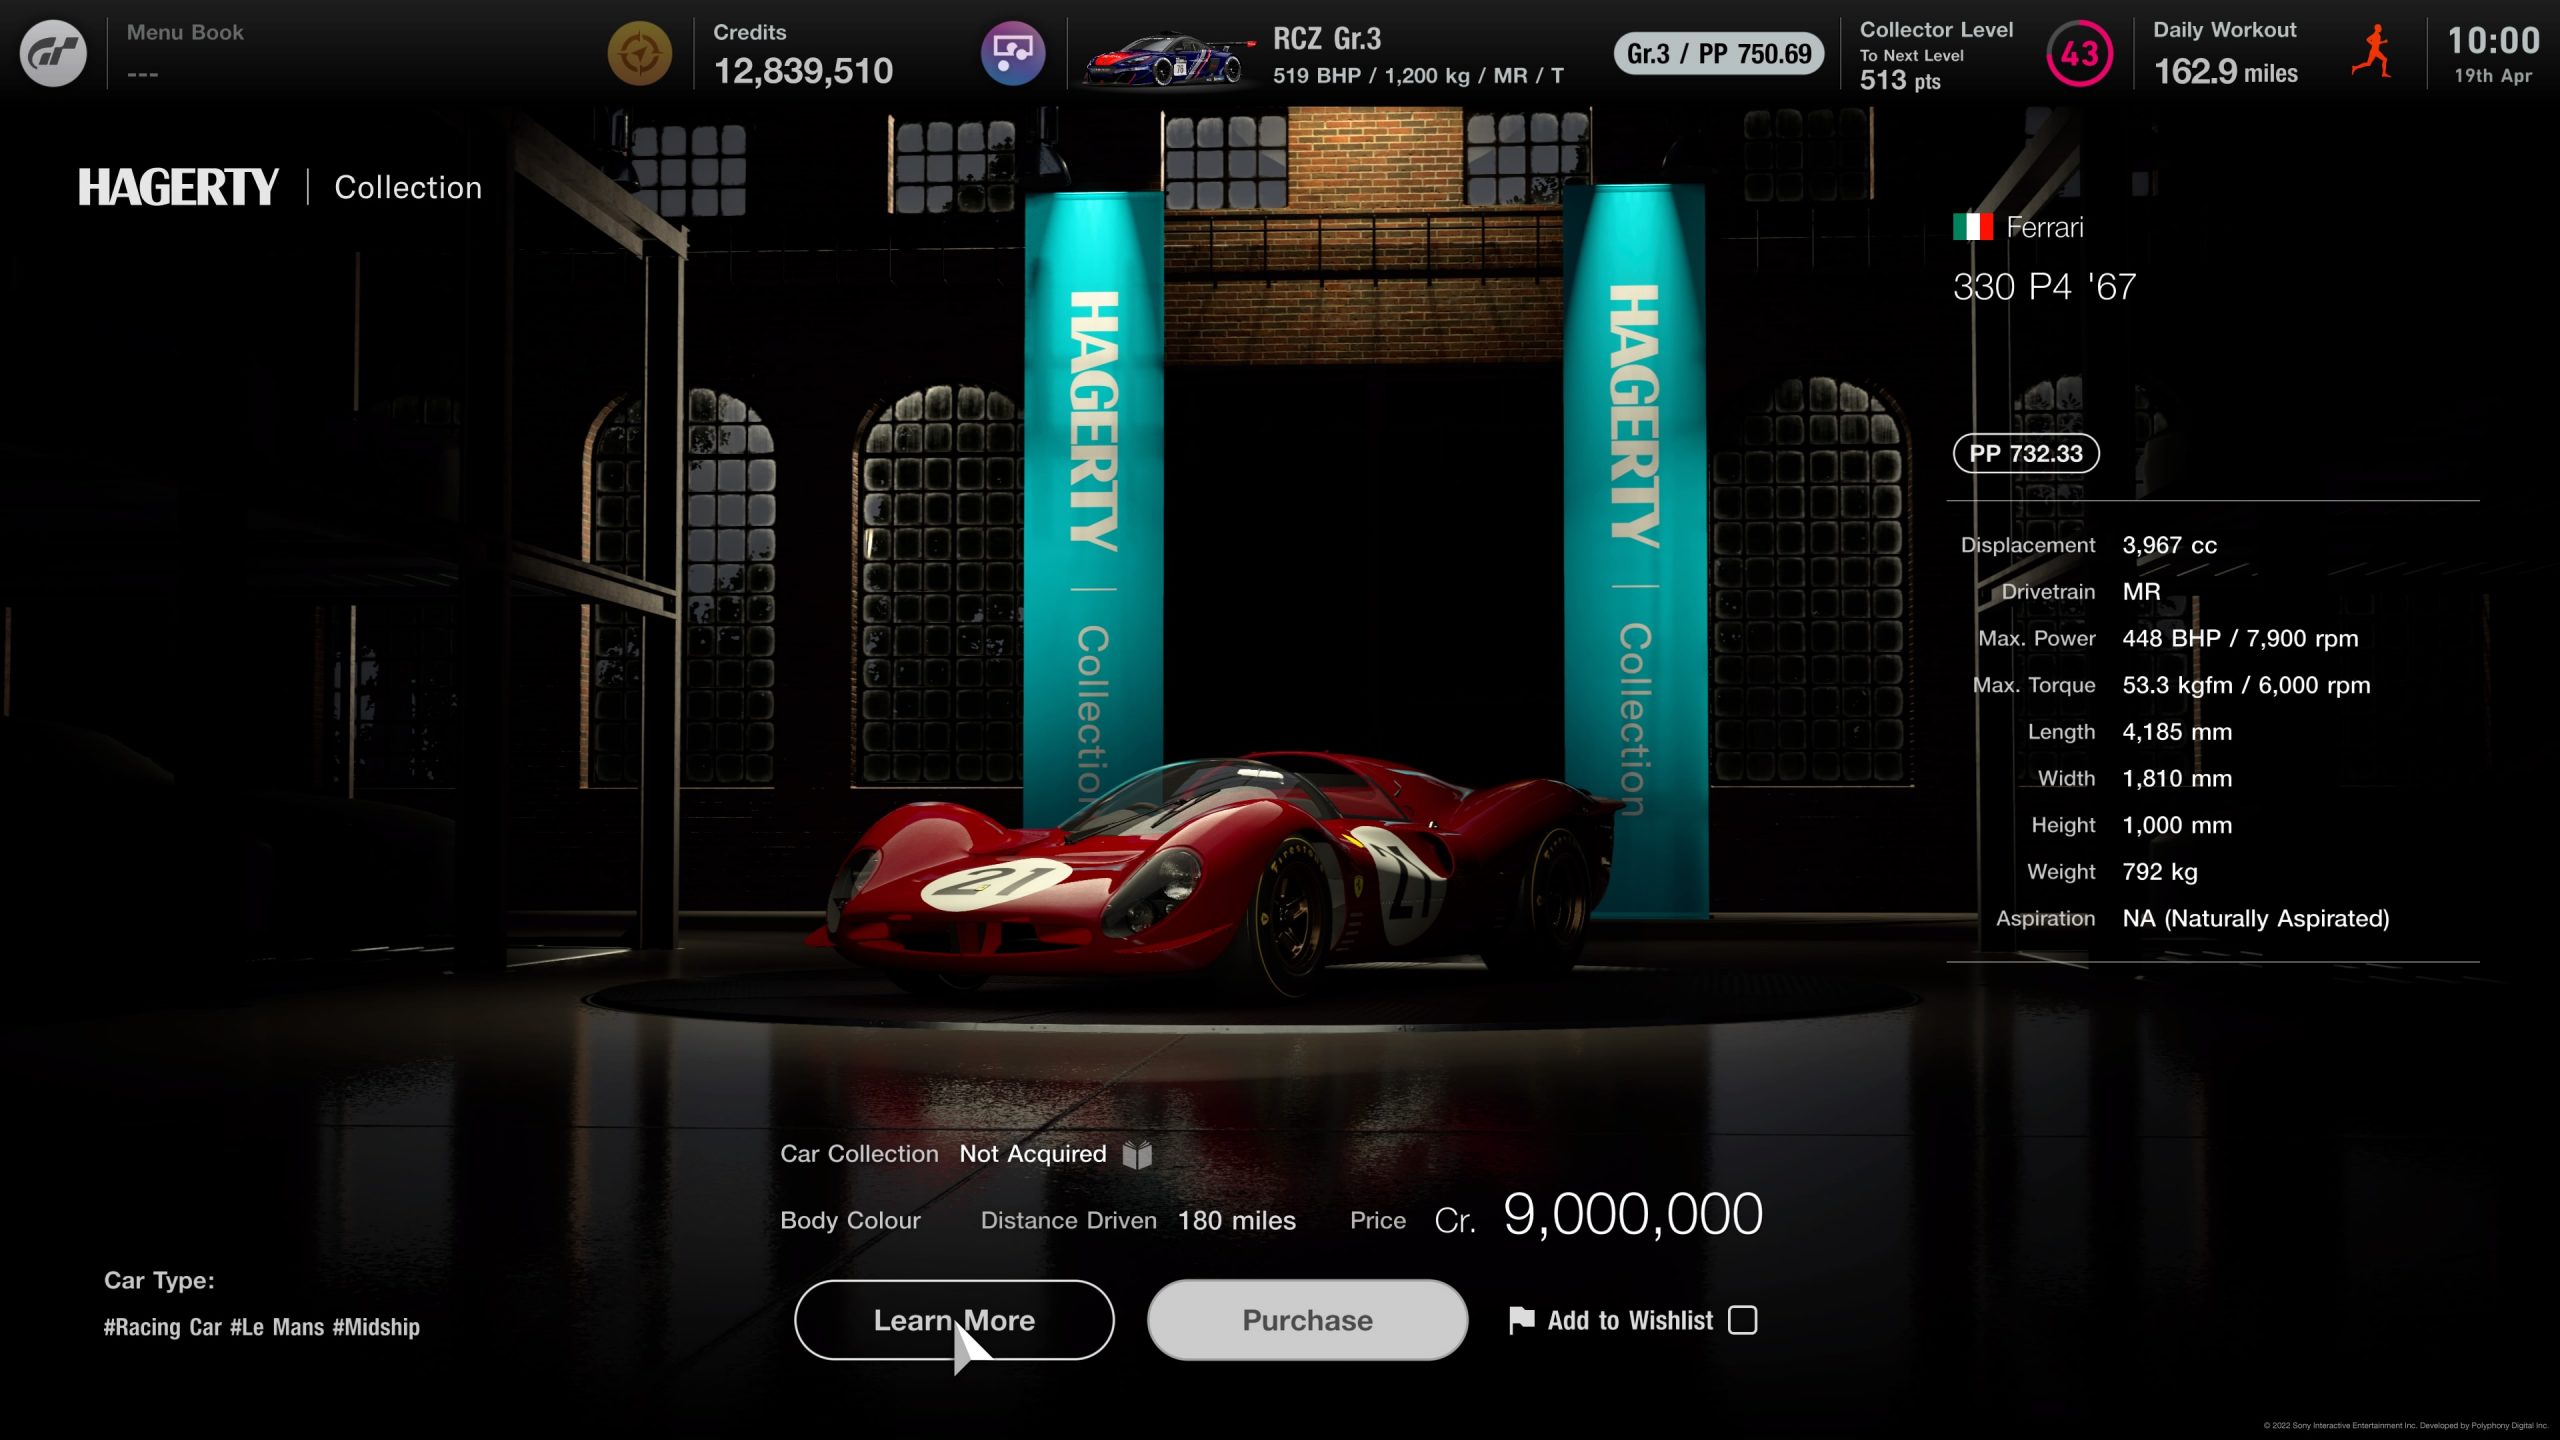 Gran Turismo 7: How to Get Three Legendary Cars Trophy